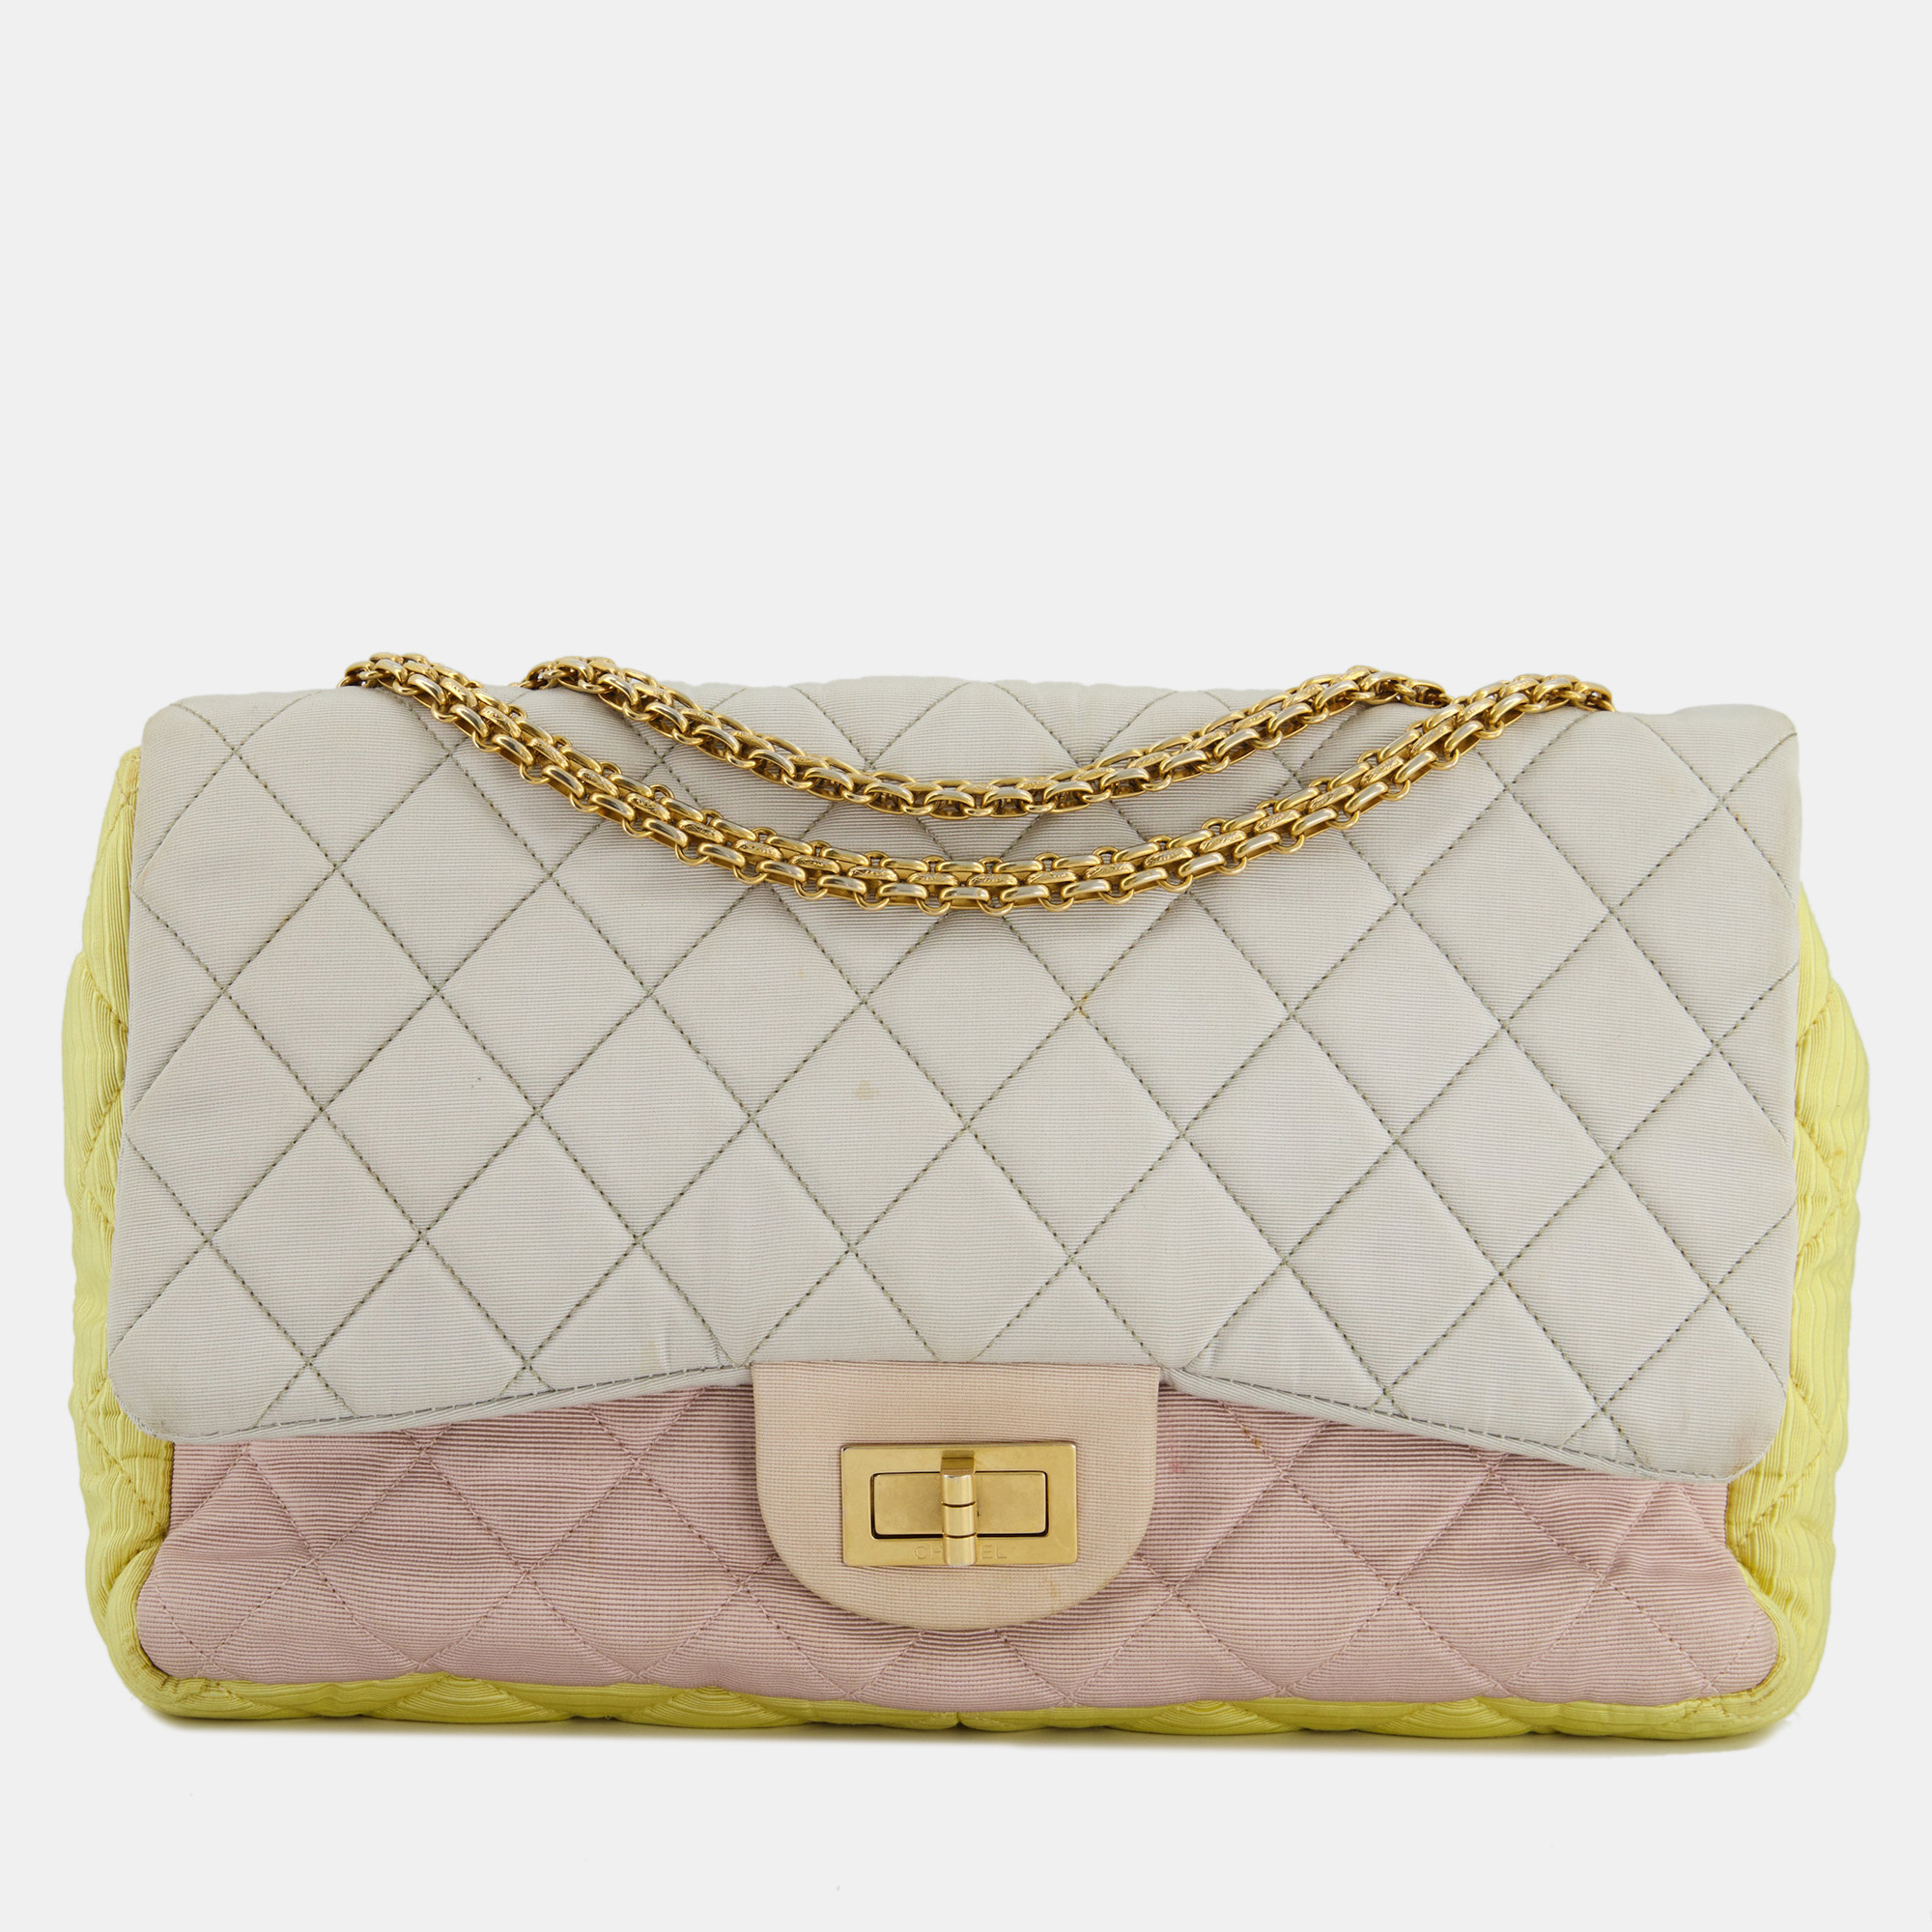 Chanel large jersey reissue pastel yellow, grey and pink with antique gold hardware